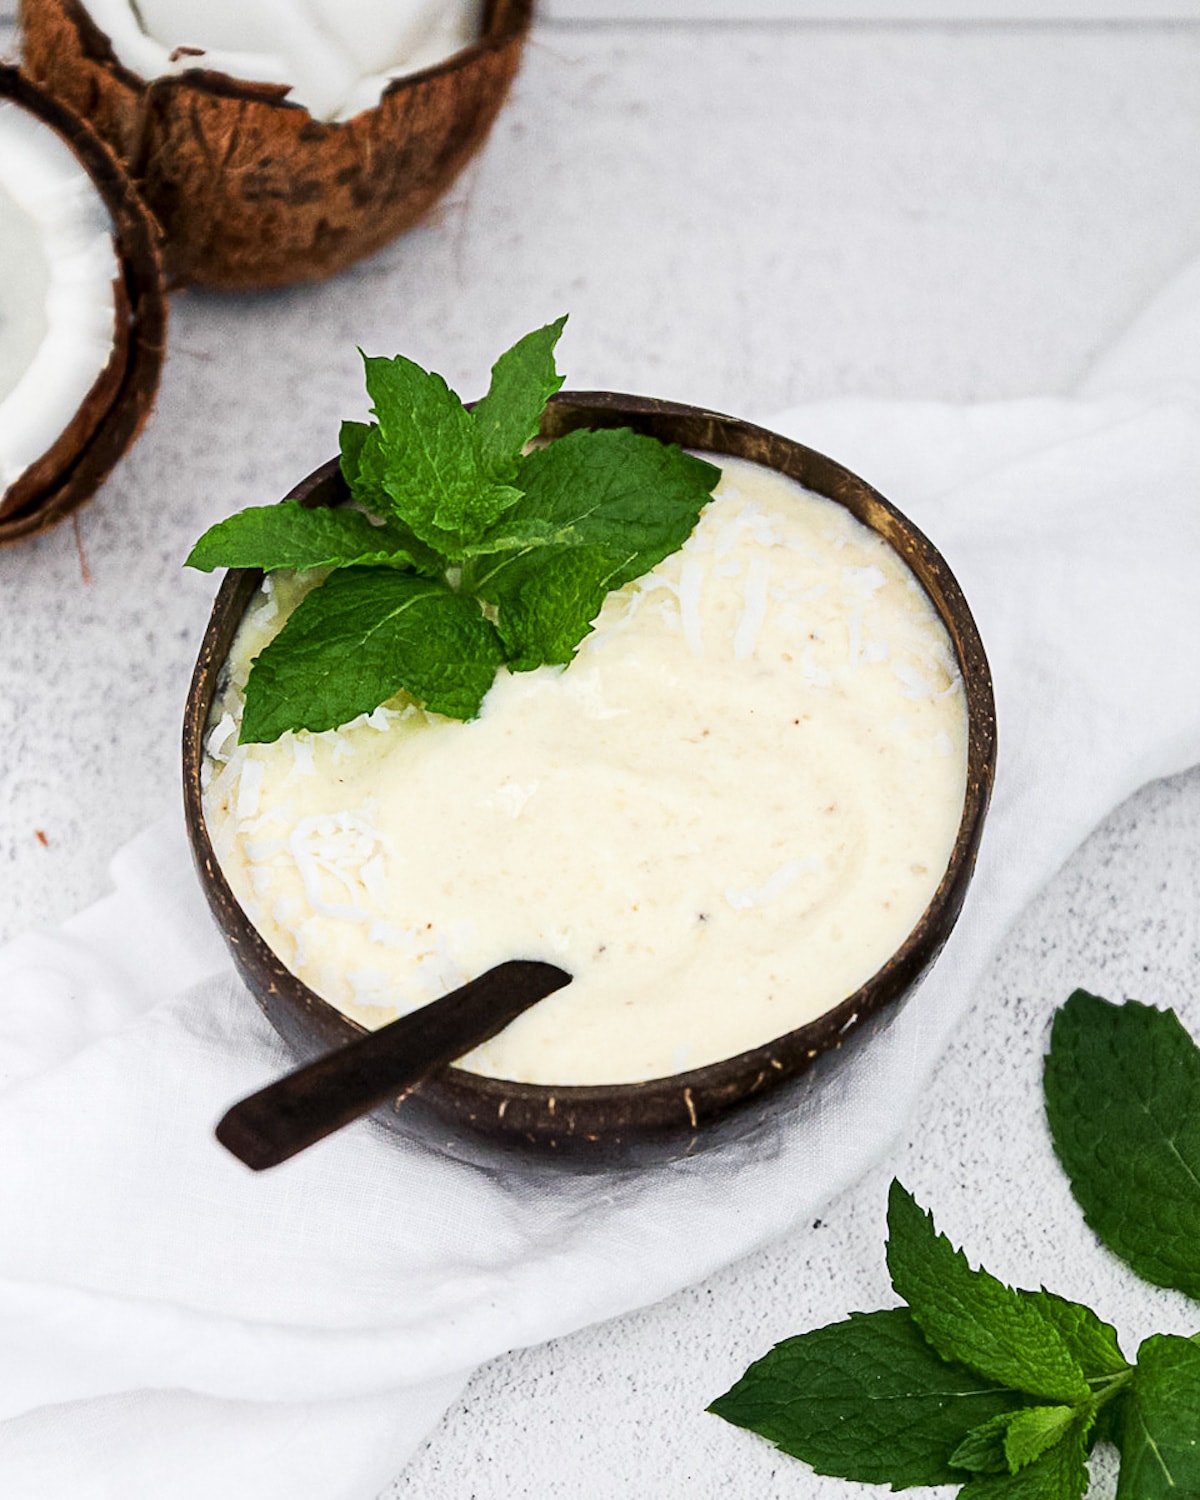 A yellow-white smoothie inside of a brown coconut bowl with a brown wooden spoon in the smoothie. It is garnished with shredded coconut and bright green mint leaves. The bowl is resting on a white linen cloth and there are coconuts and more fresh mint in the corners of the picture.